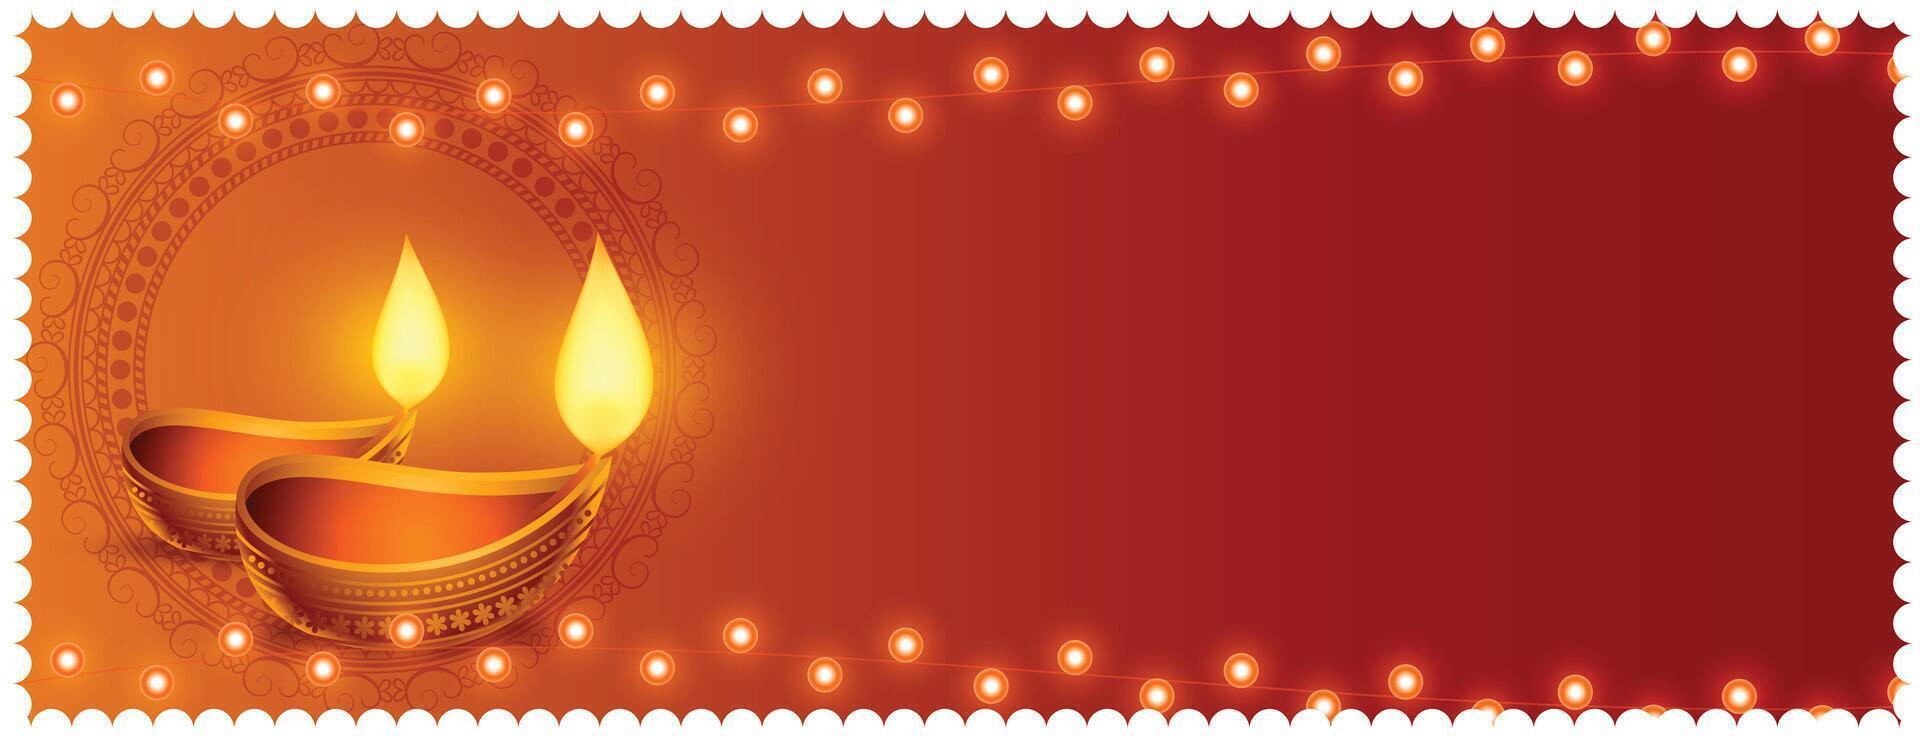 shubh deepavali festival banner with text space and oil lamp vector